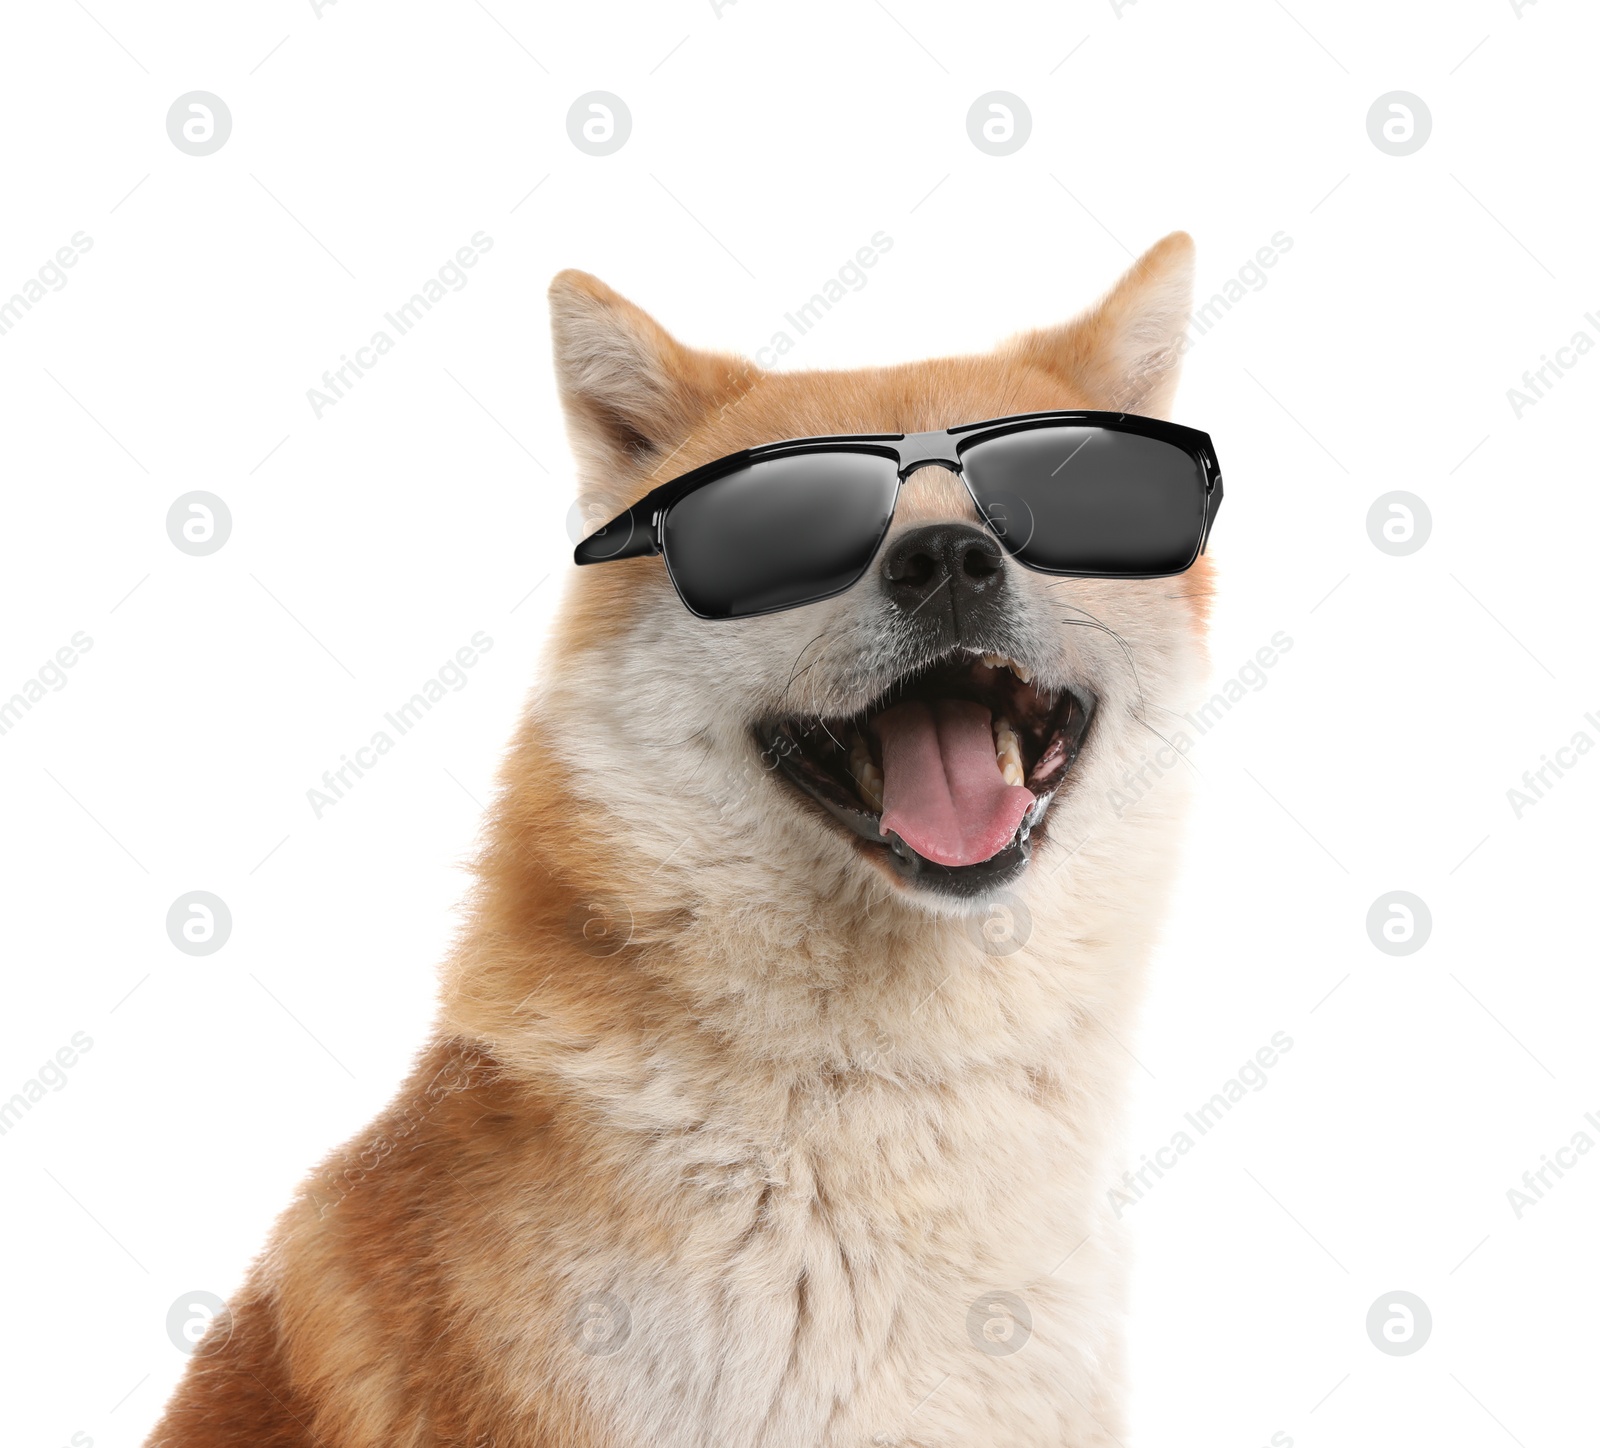 Image of Cute Akita Inu dog with sunglasses on white background